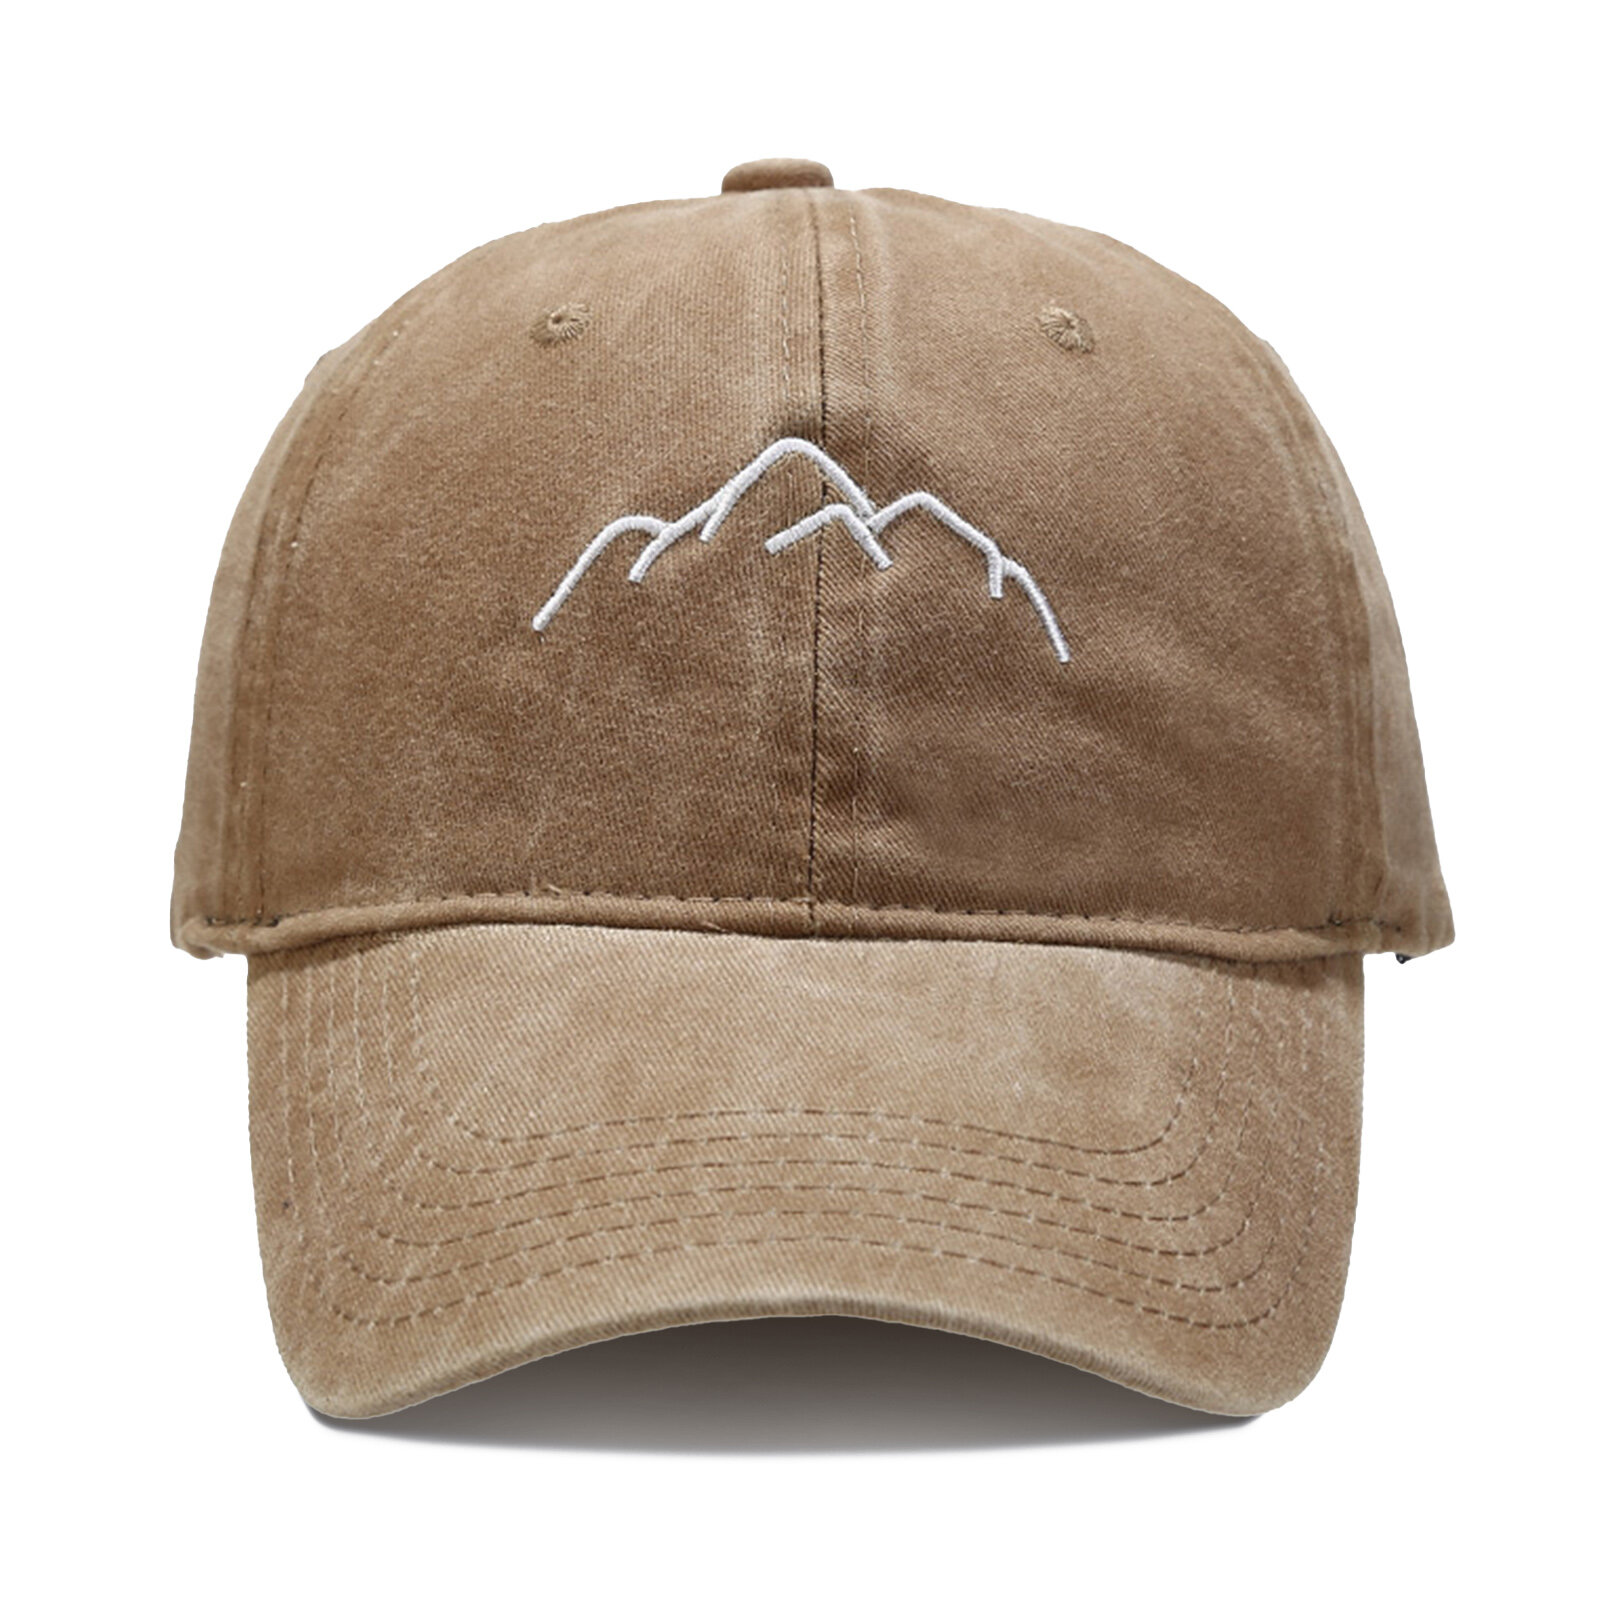 

Neutral Cotton Outdoor Sports Washed Old Mountaineering Fishing Hat Sunscreen Sunshade Baseball Cap